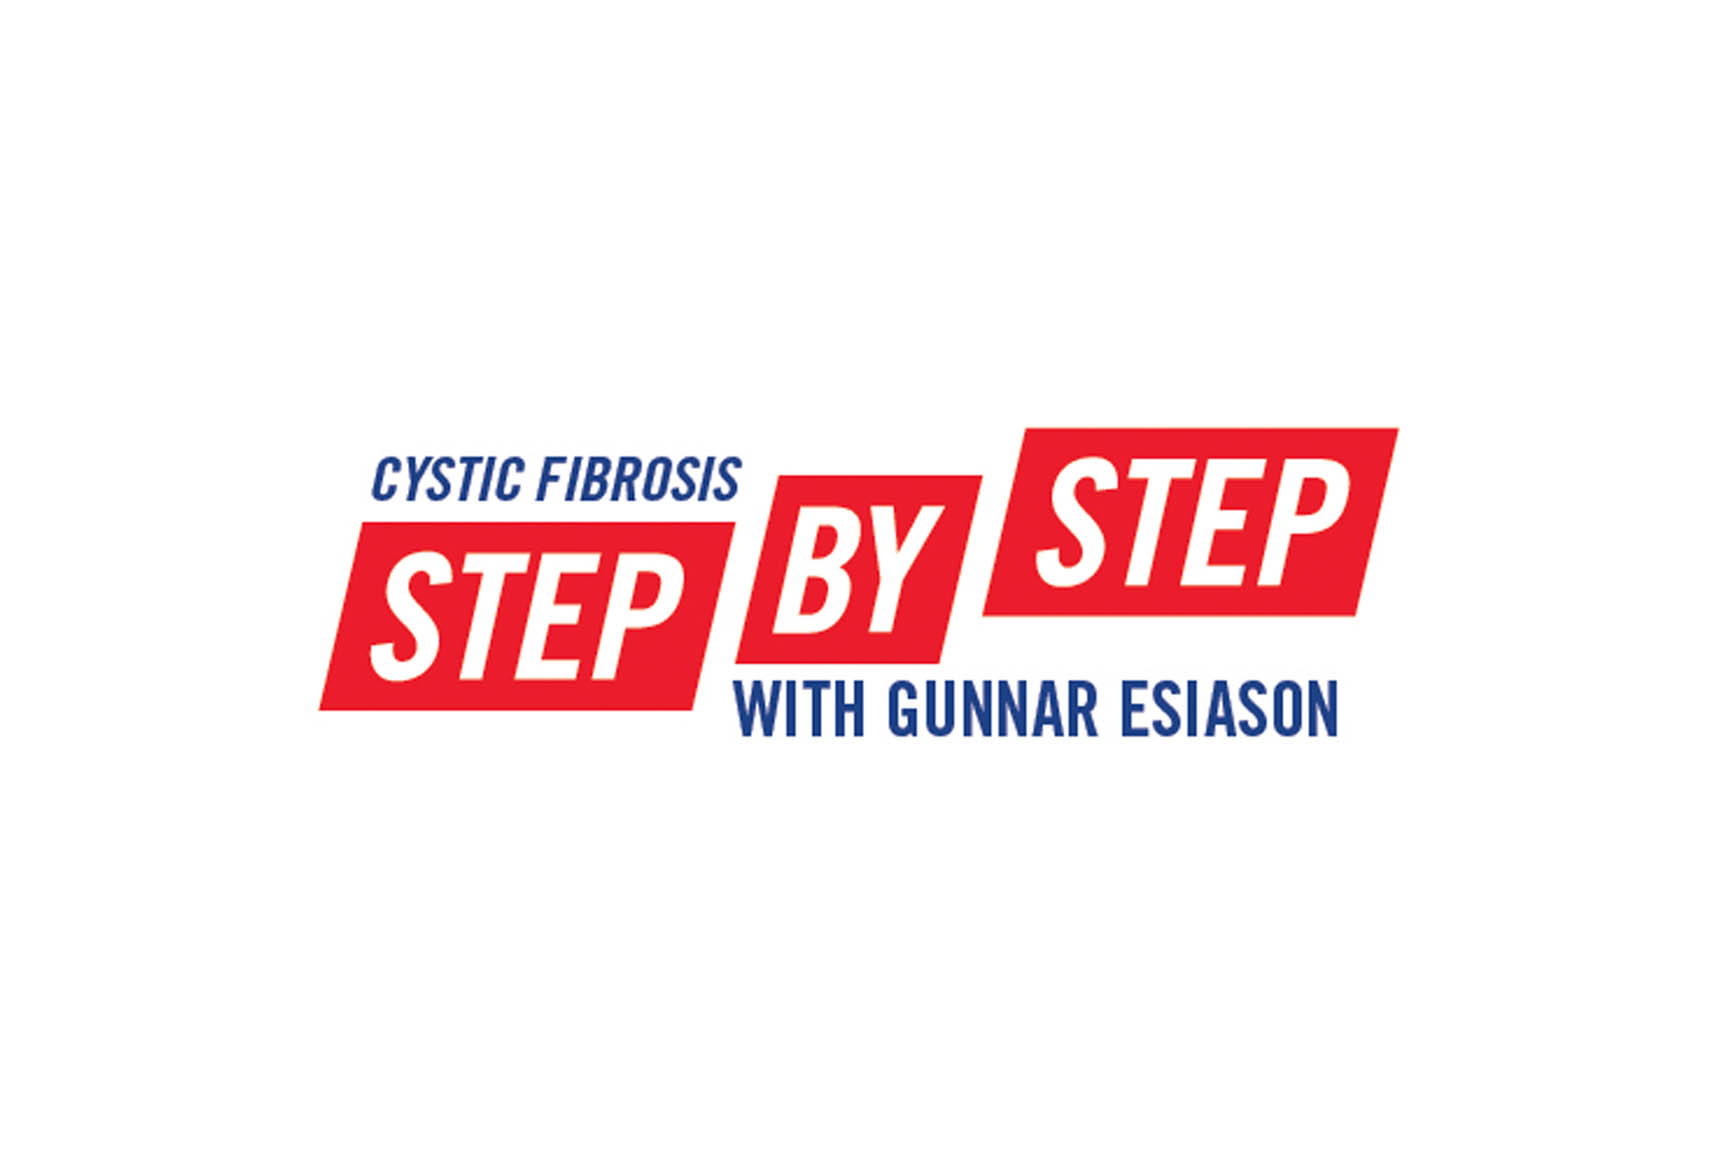 Cystic Fibrosis Step by Step: What is Cystic Fibrosis?